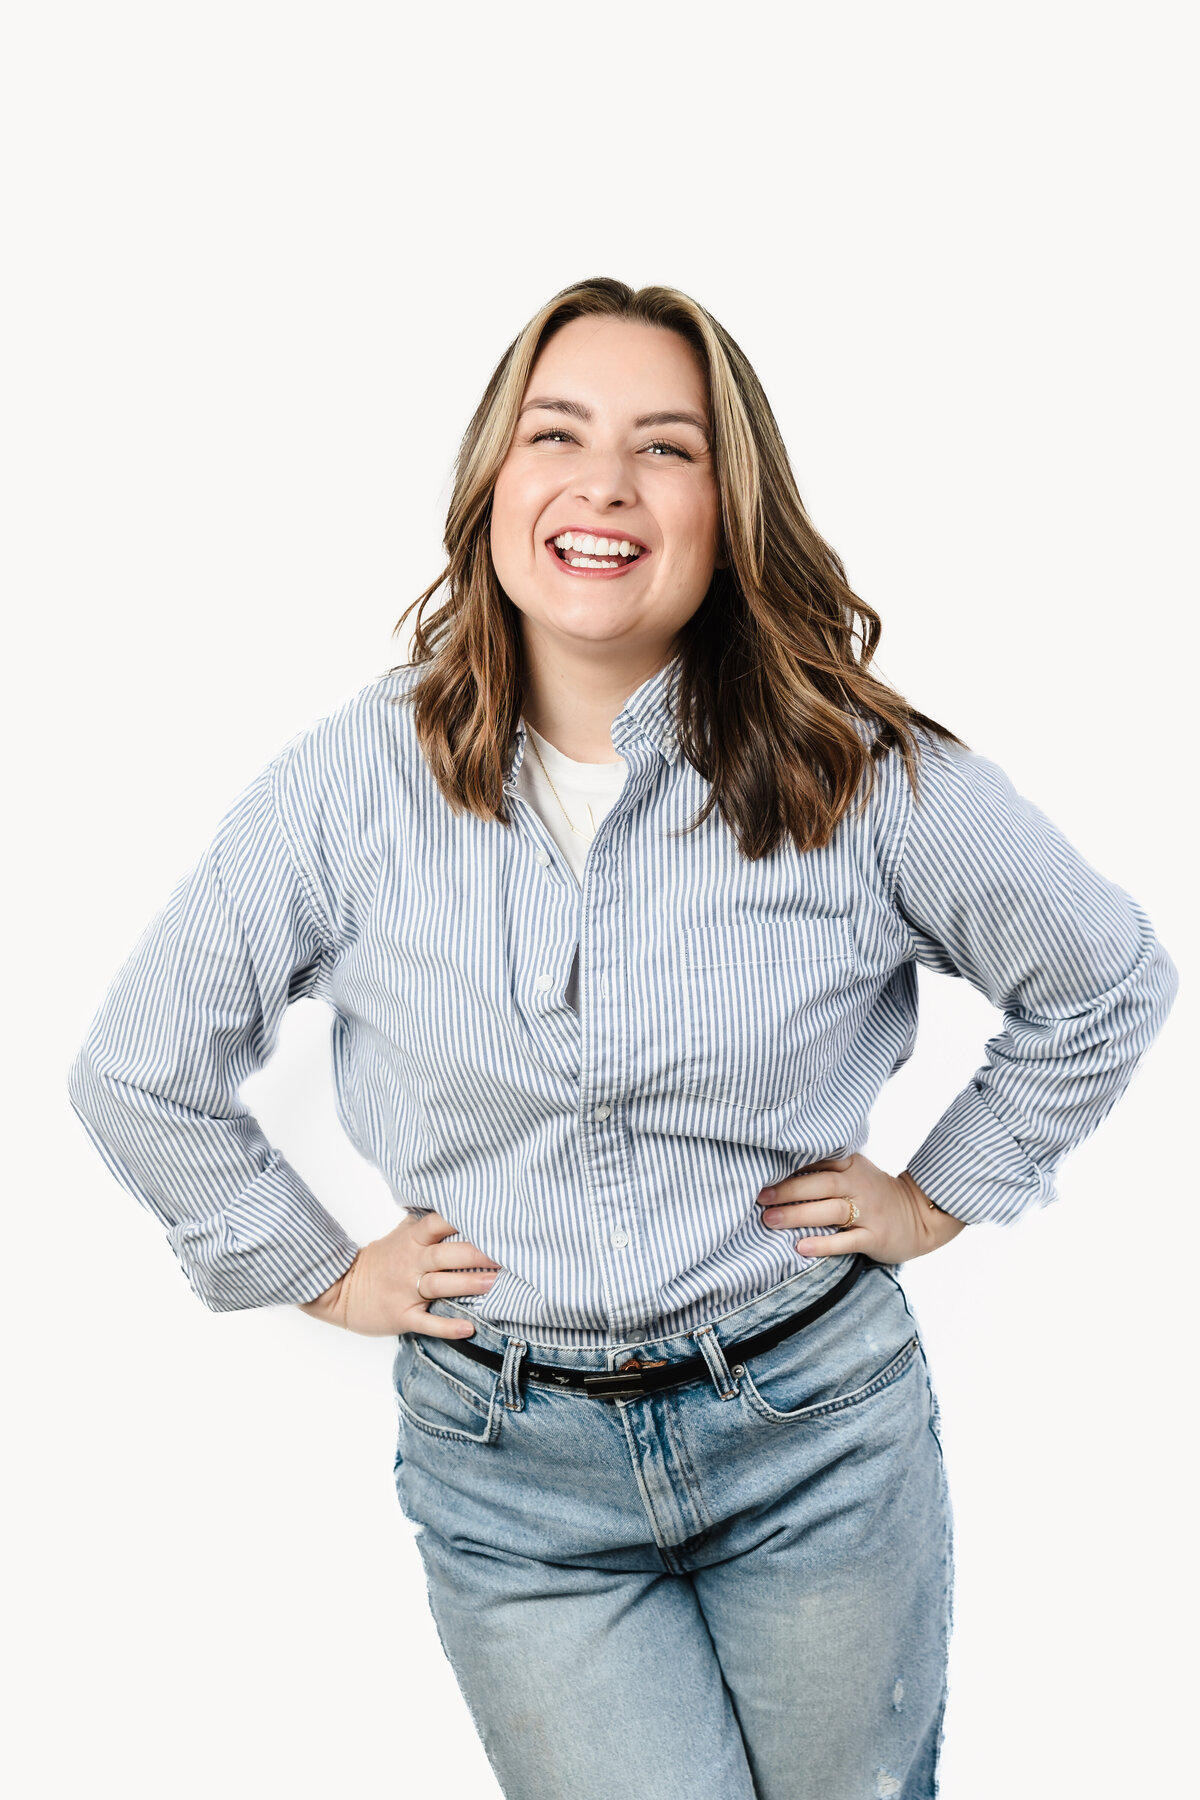 brand photo of a Marketing Strategist posing with both hands in the waist